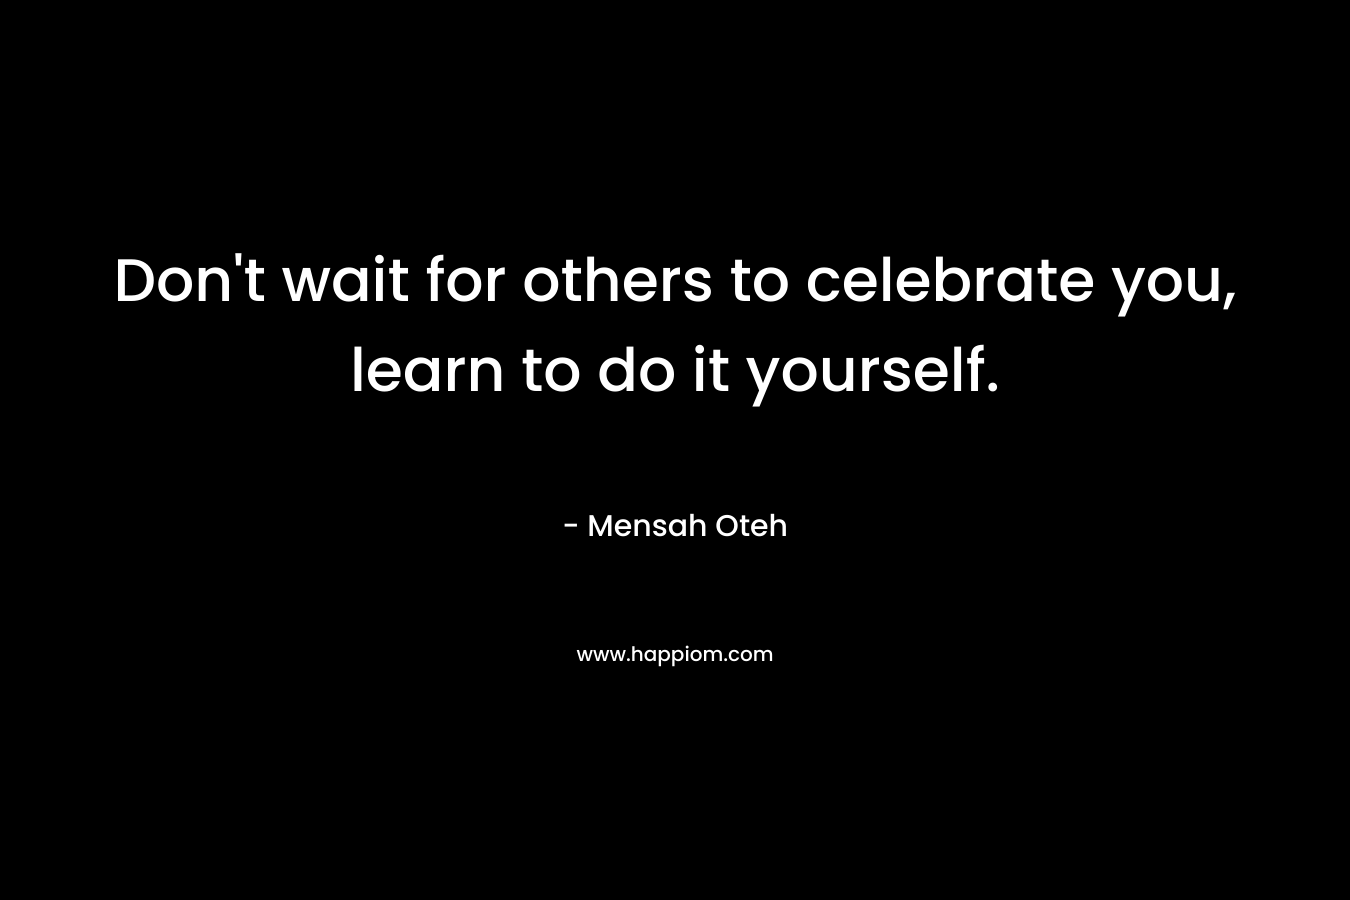 Don't wait for others to celebrate you, learn to do it yourself.